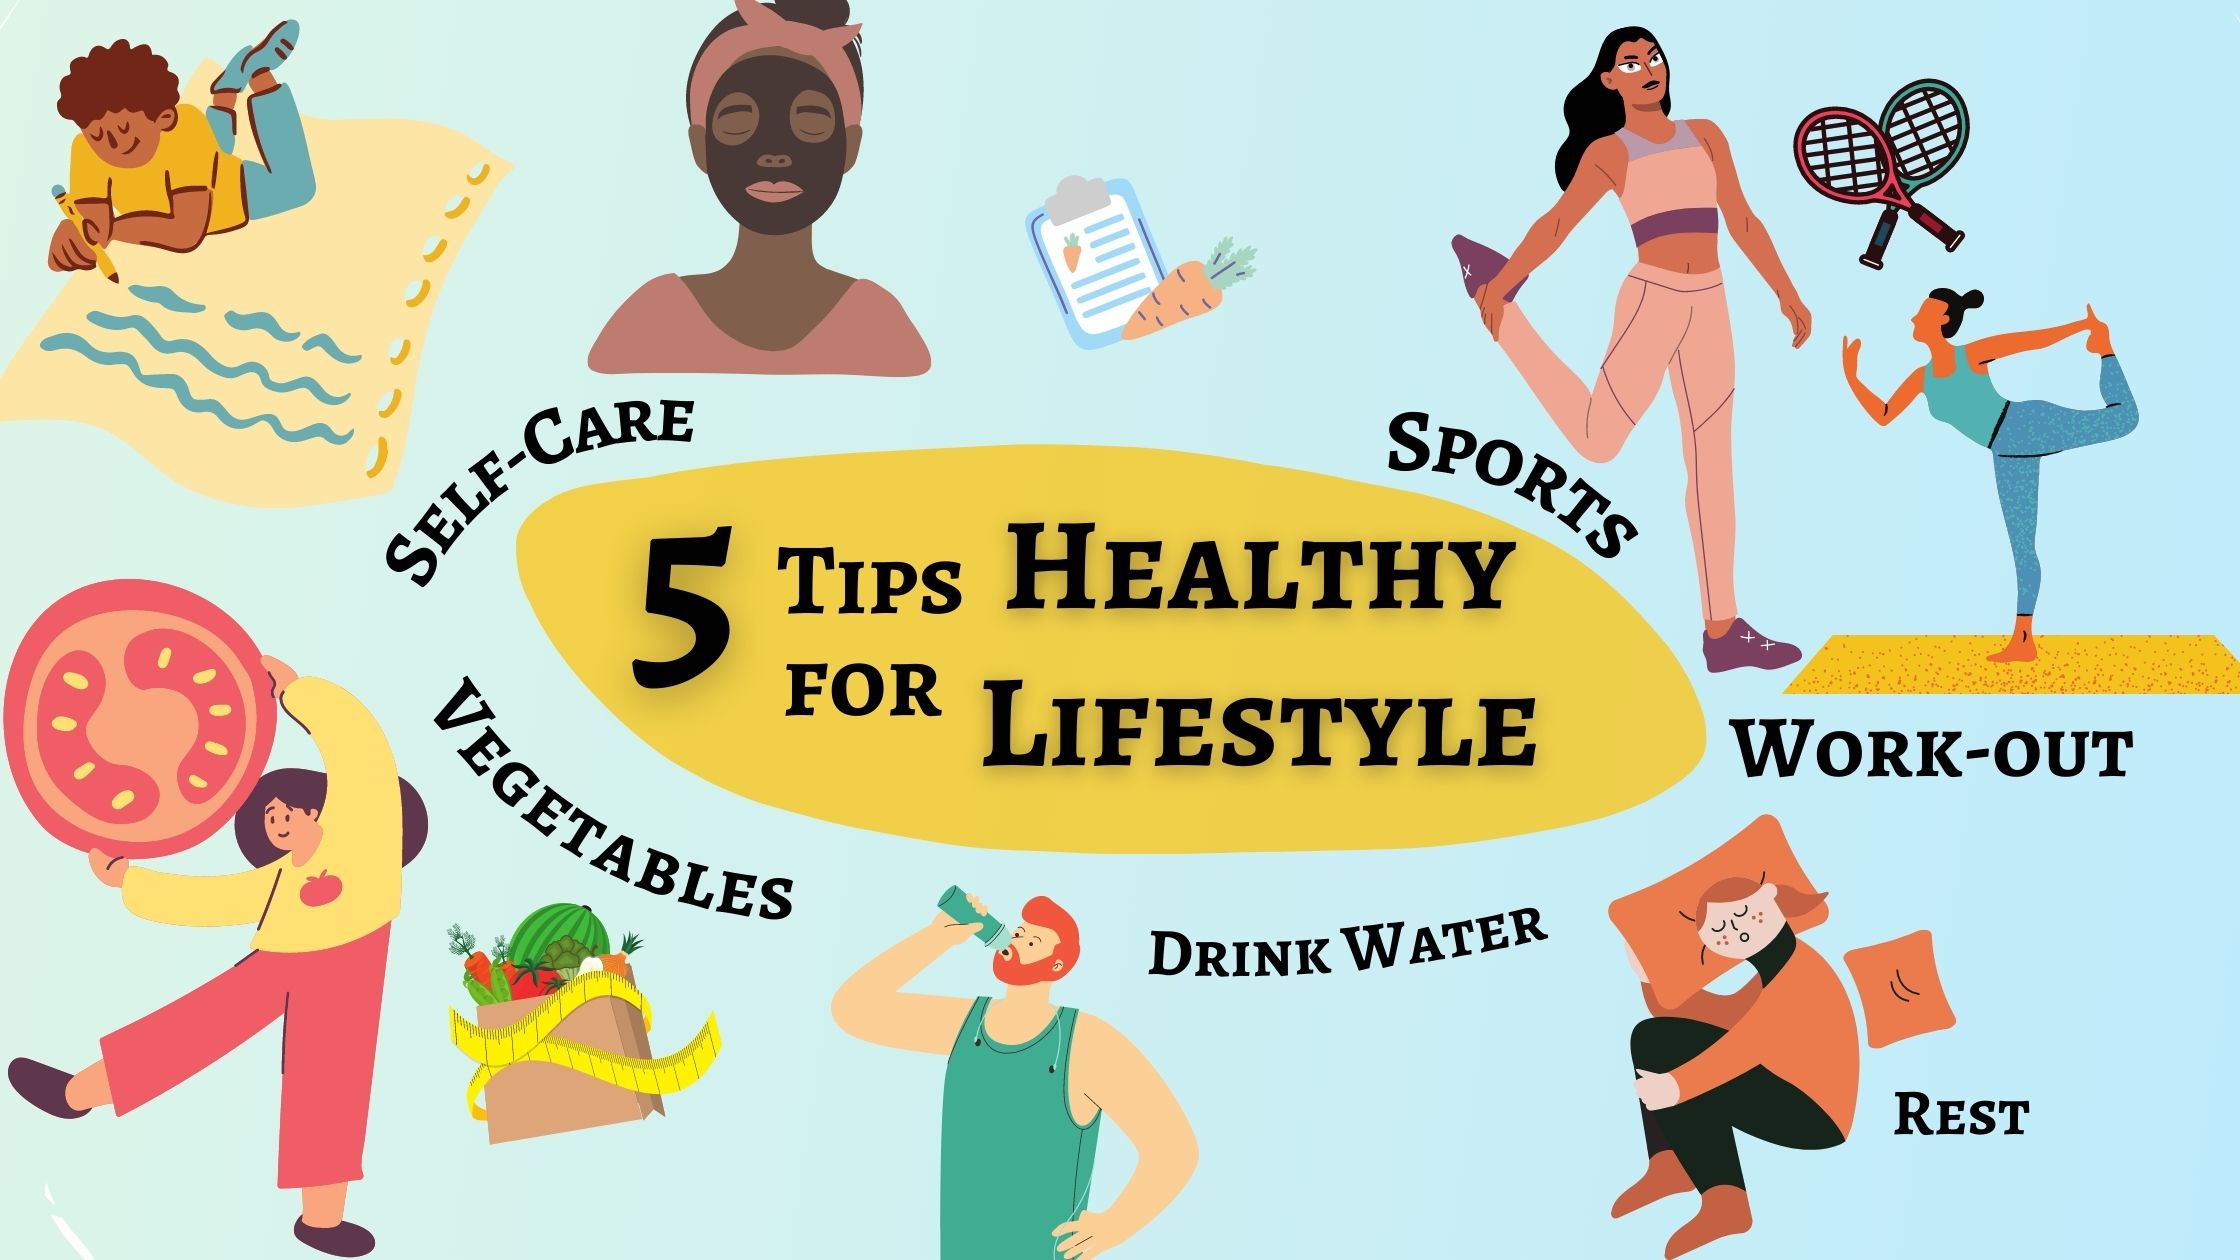 Healthy life and self-care